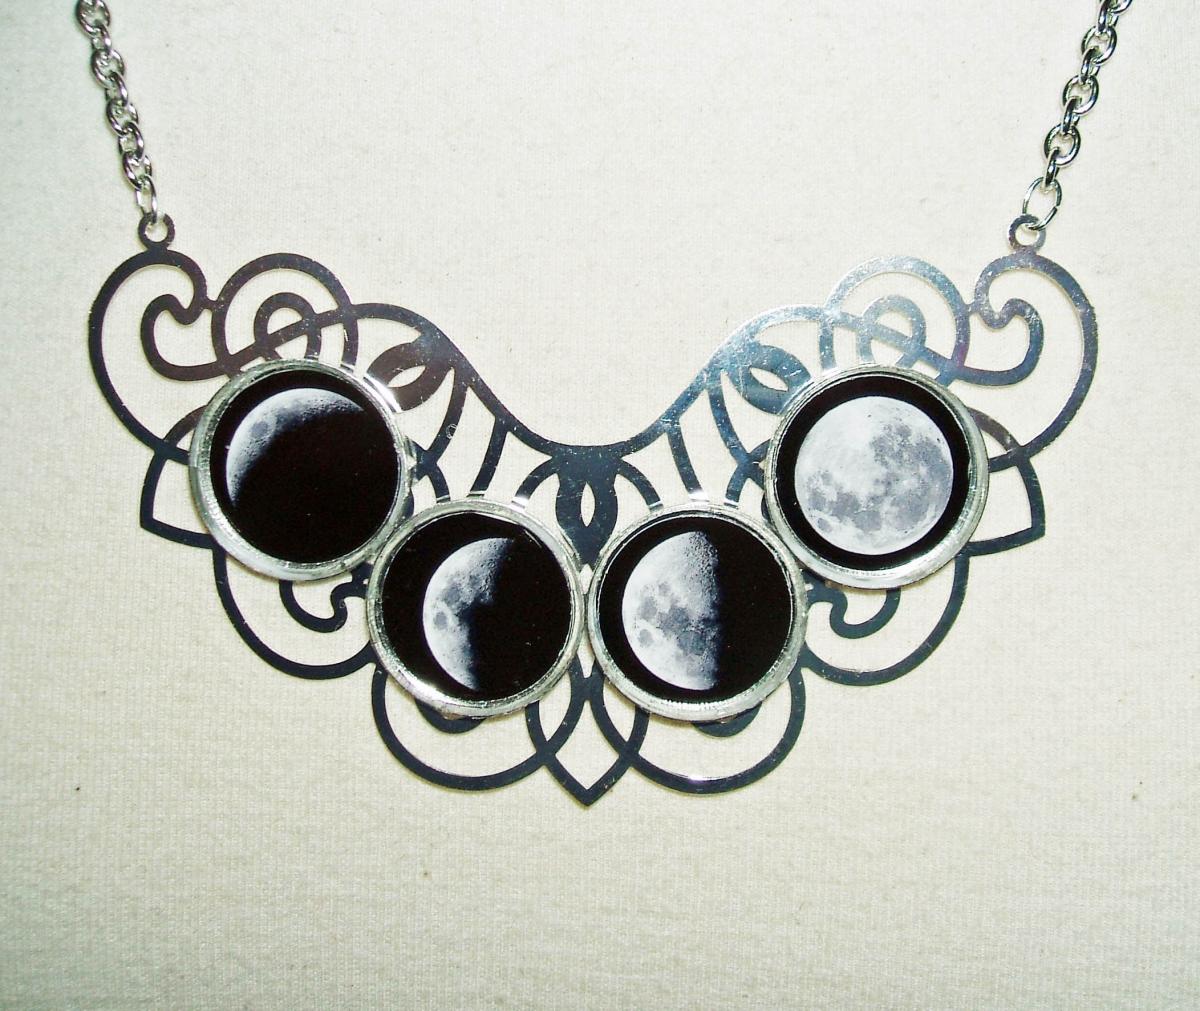 Moon Phases Necklace Moon Goddess Statement Altered Art Jewelry Celestial Original Design